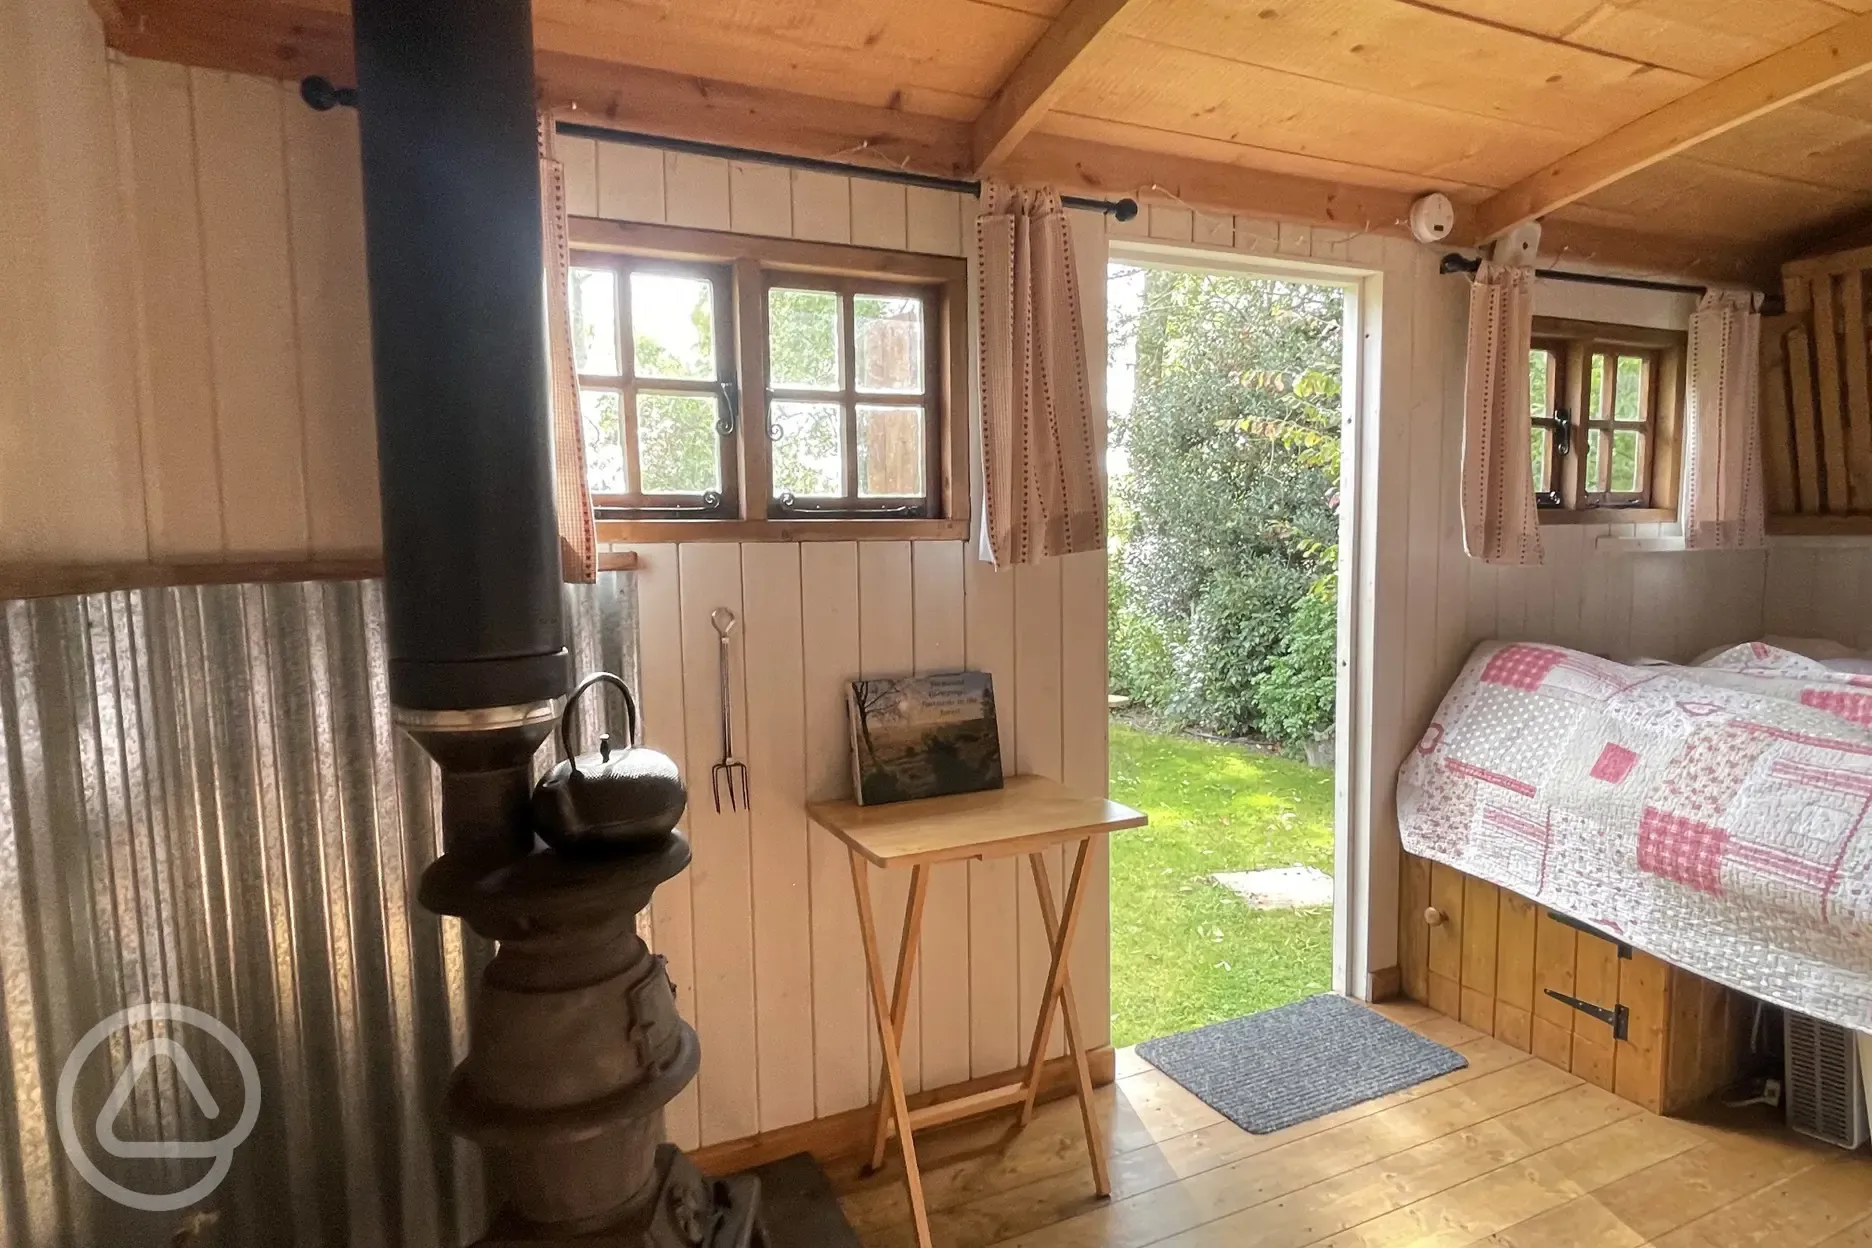 Shepherds hut interior looking out on to picnic bench on the grass outside